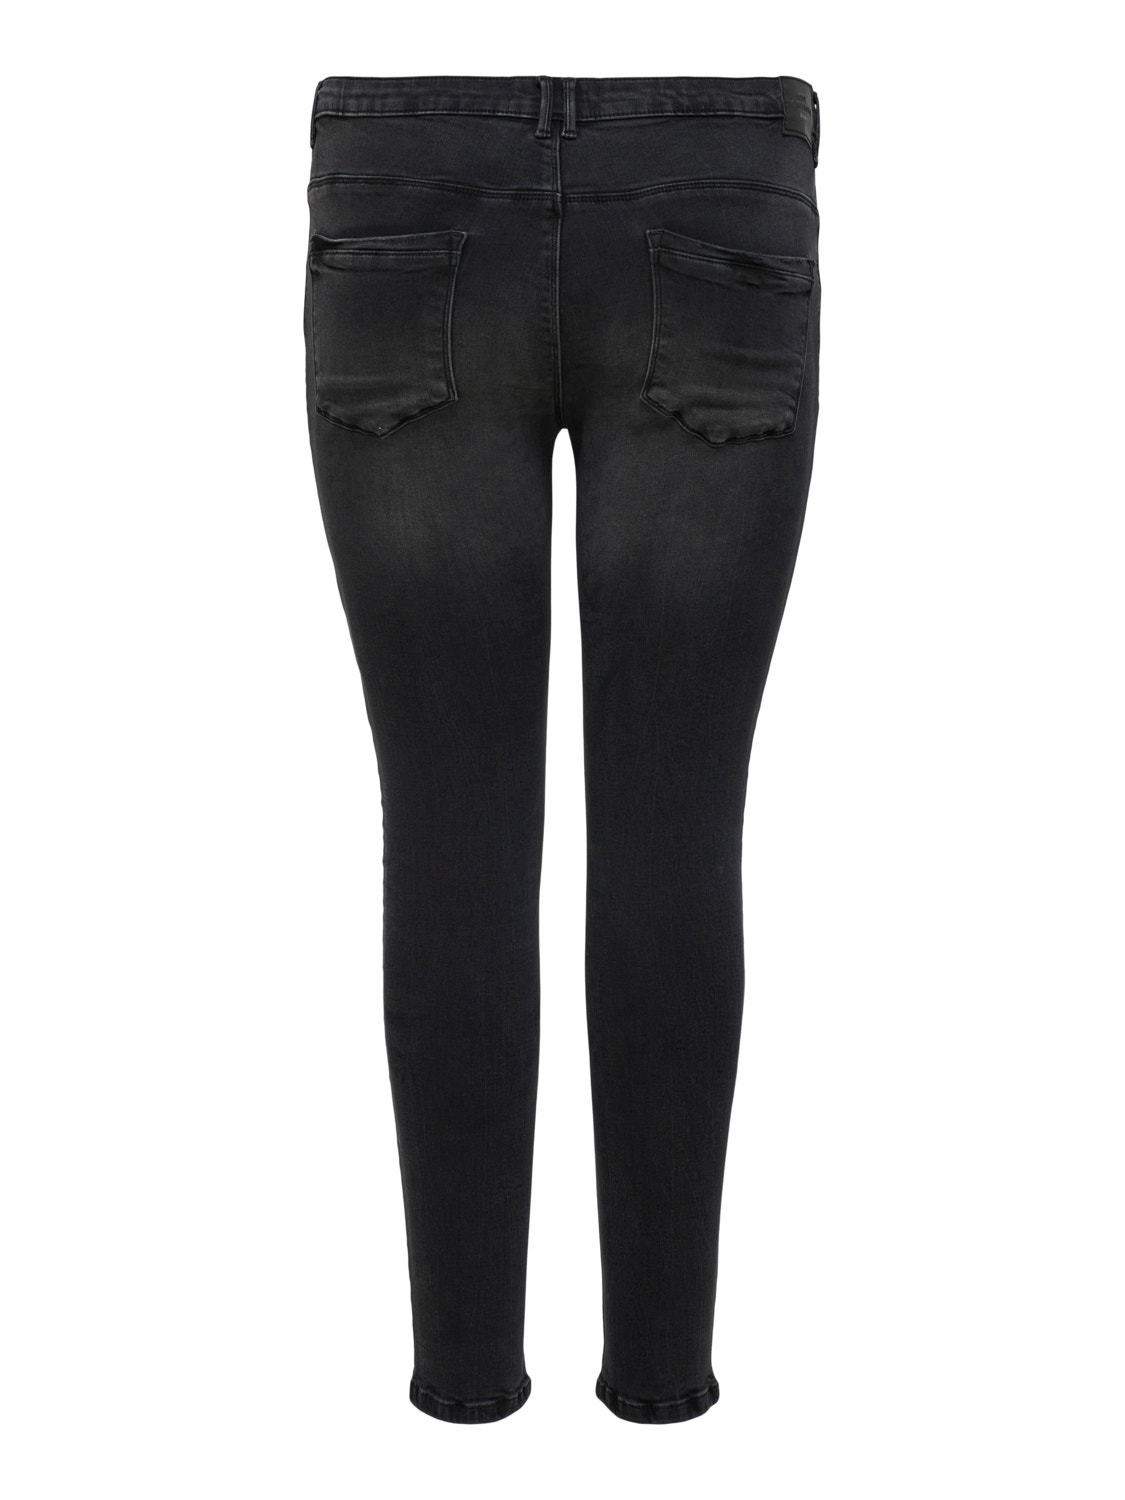 ONLY Skinny Fit Mid waist Destroyed hems Jeans -Black - 15250684